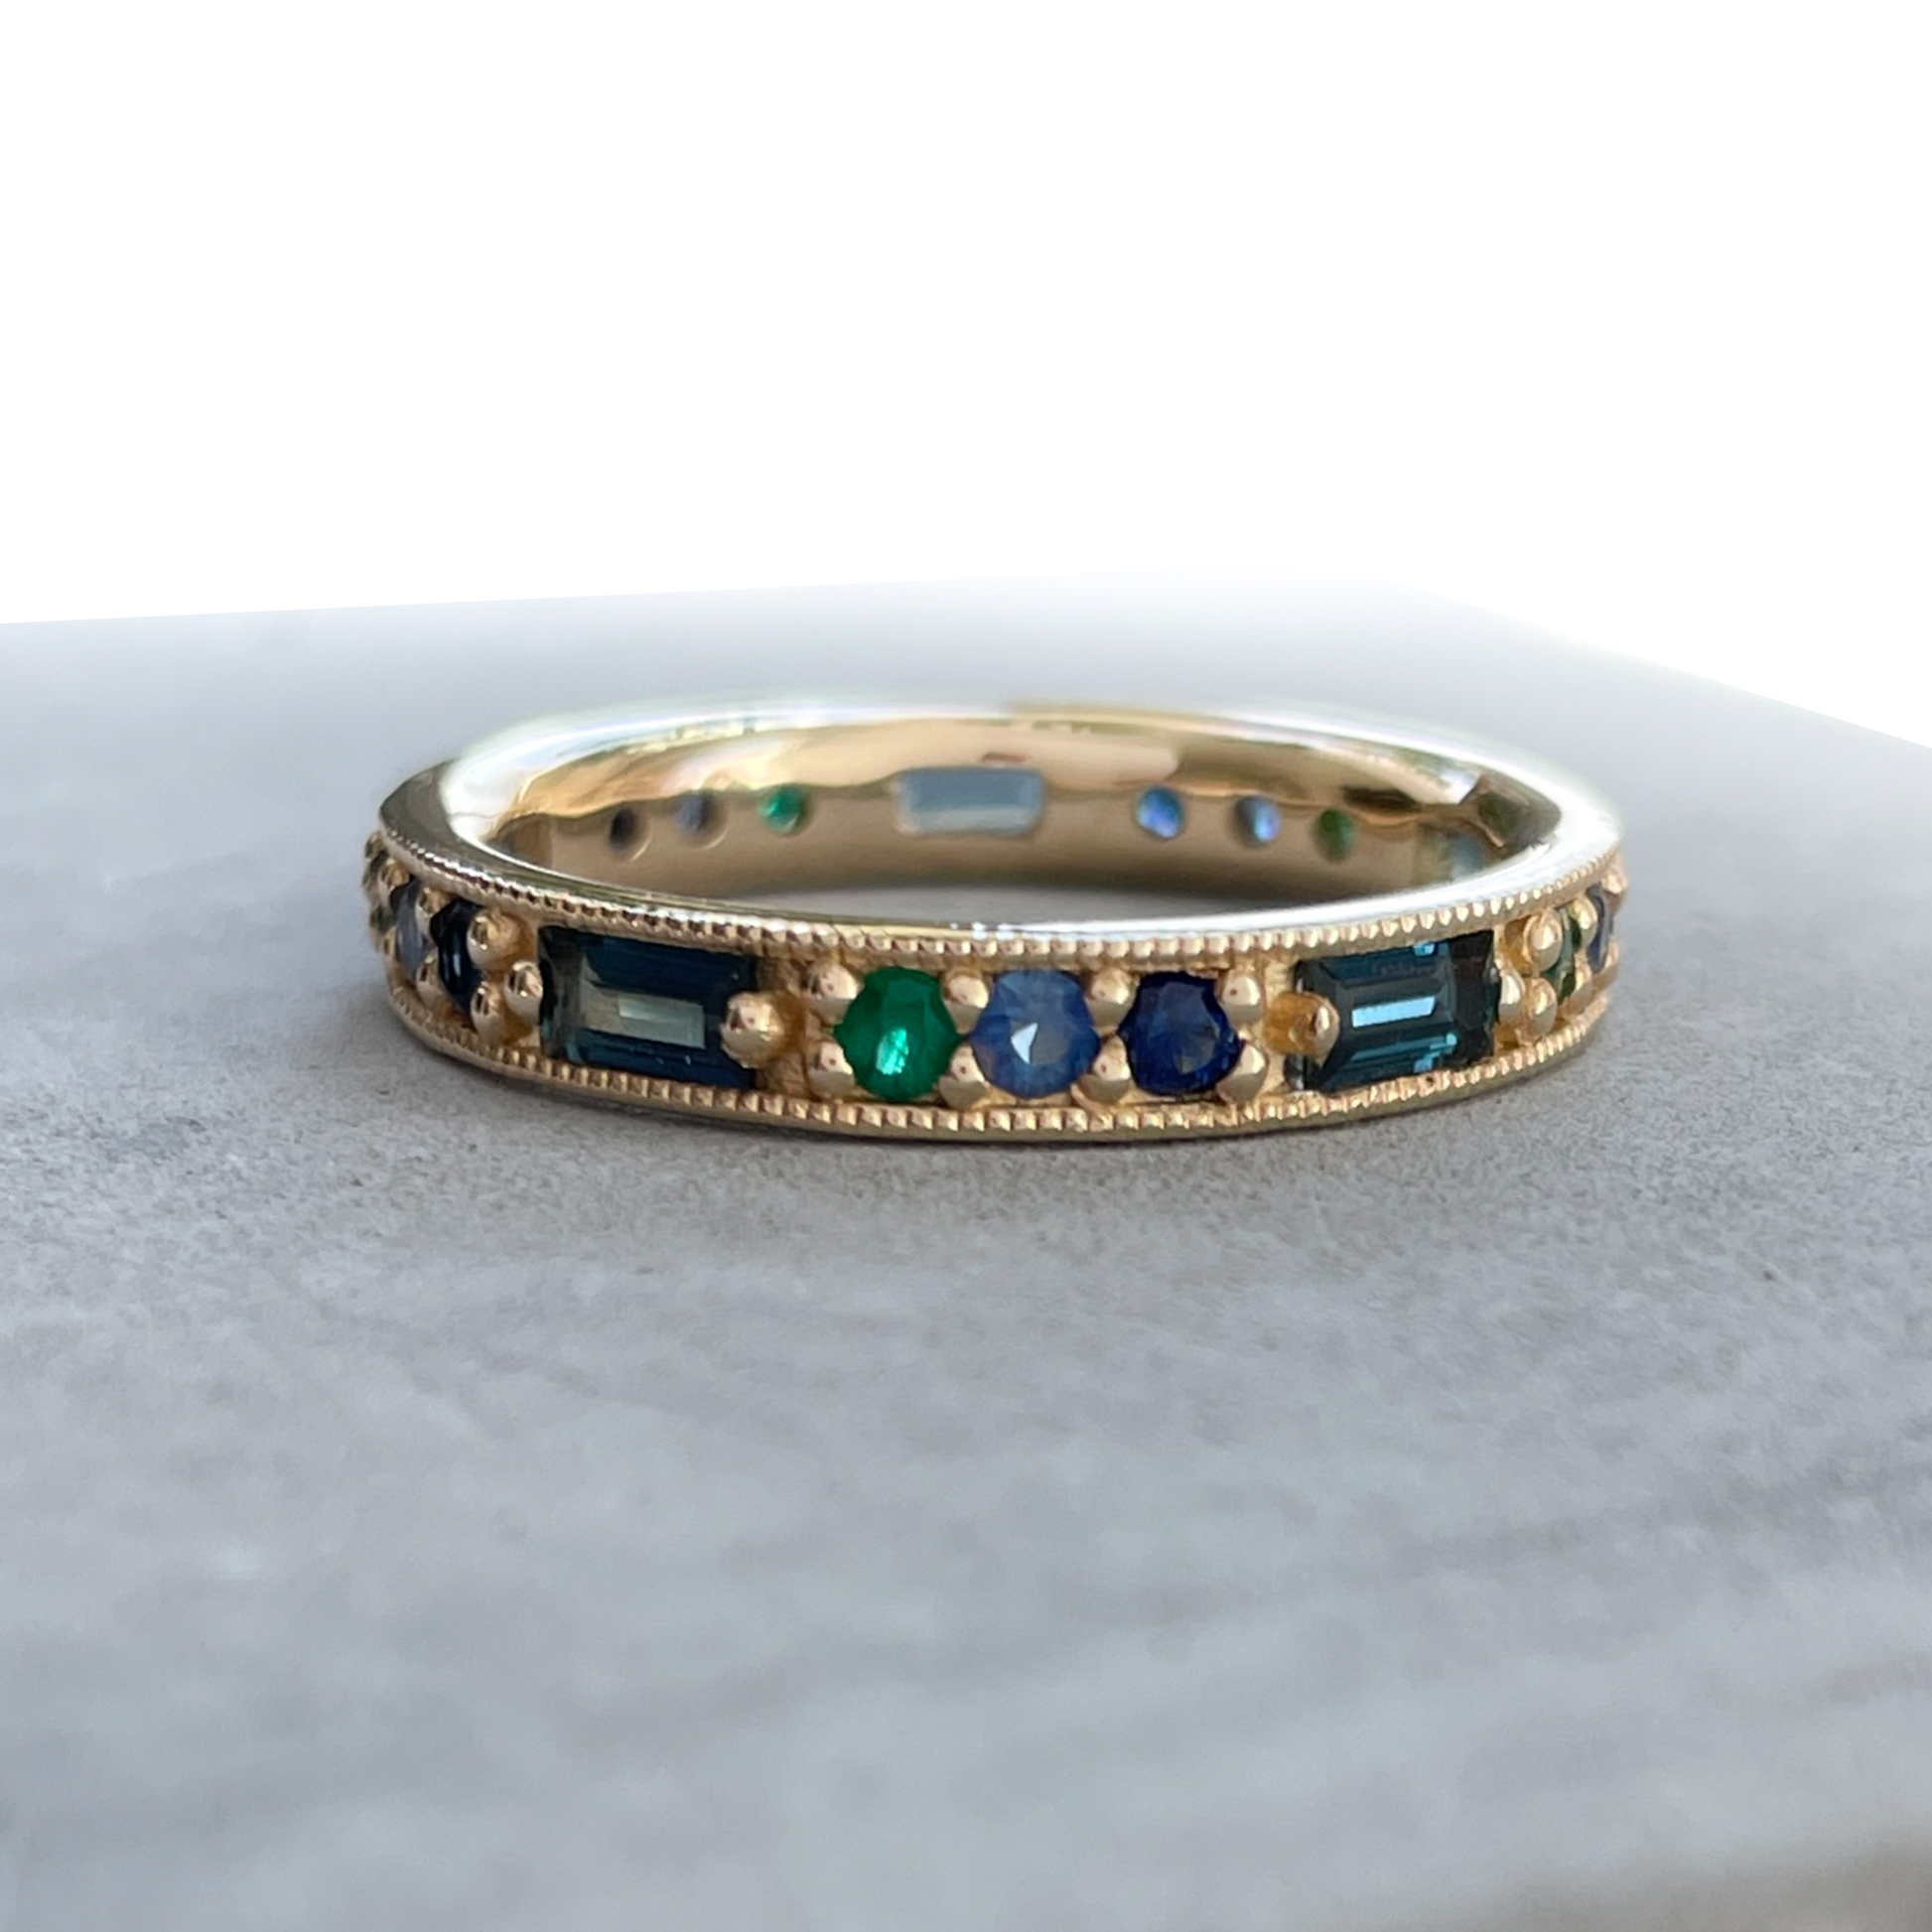 OctaHedron Jewelry San Francisco Made Presidio Blue & Green Shade Emerald & Sapphire Baguette & Round Cut Eternity Band Ring 14k Yellow Gold